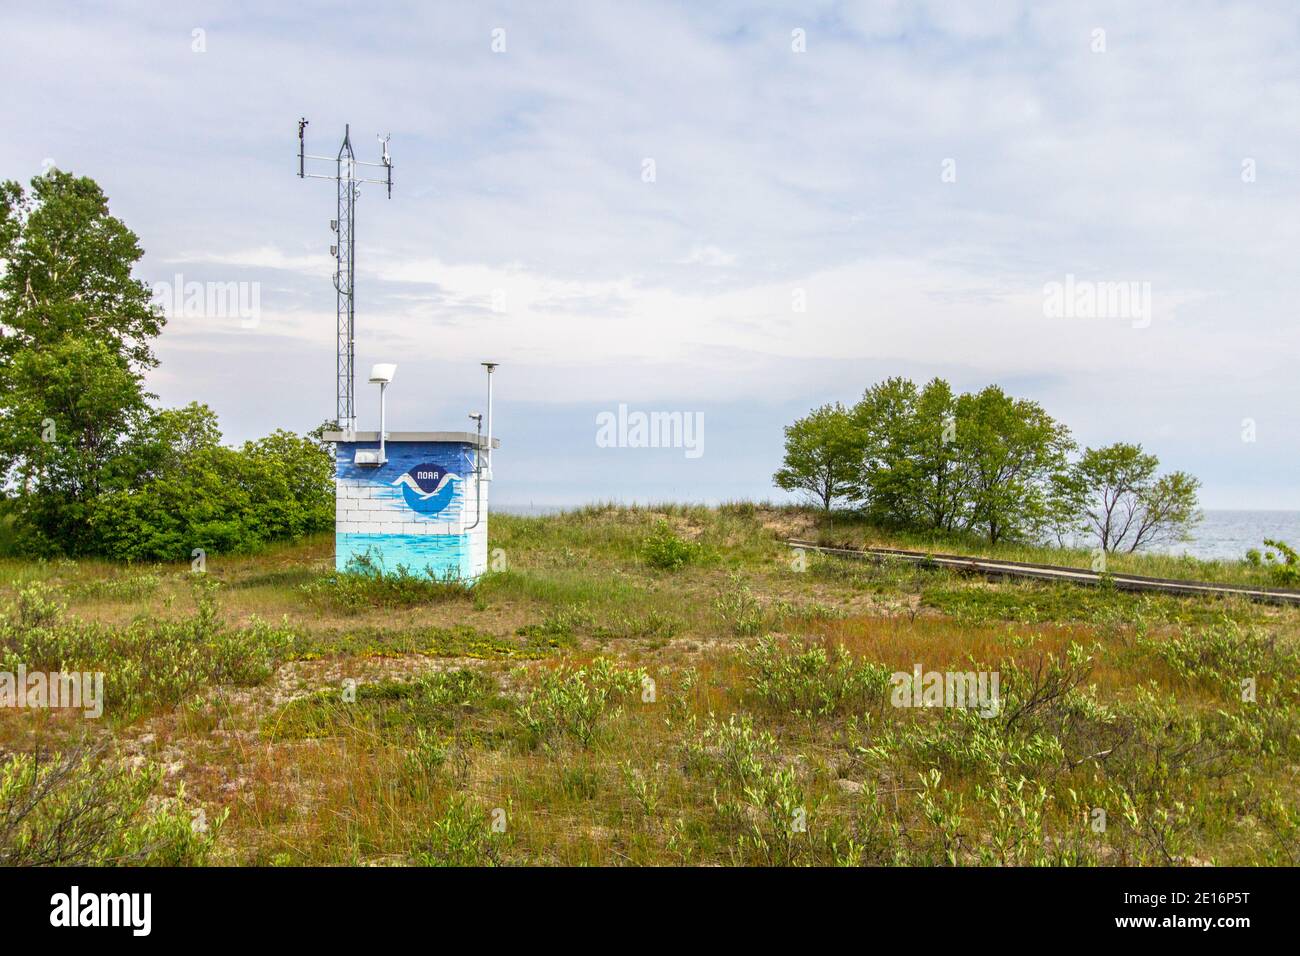 Brimley, Michigan, USA - NOAA weather observatory station on the coast of Lake Superior in the Upper Peninsula of Michigan. Stock Photo